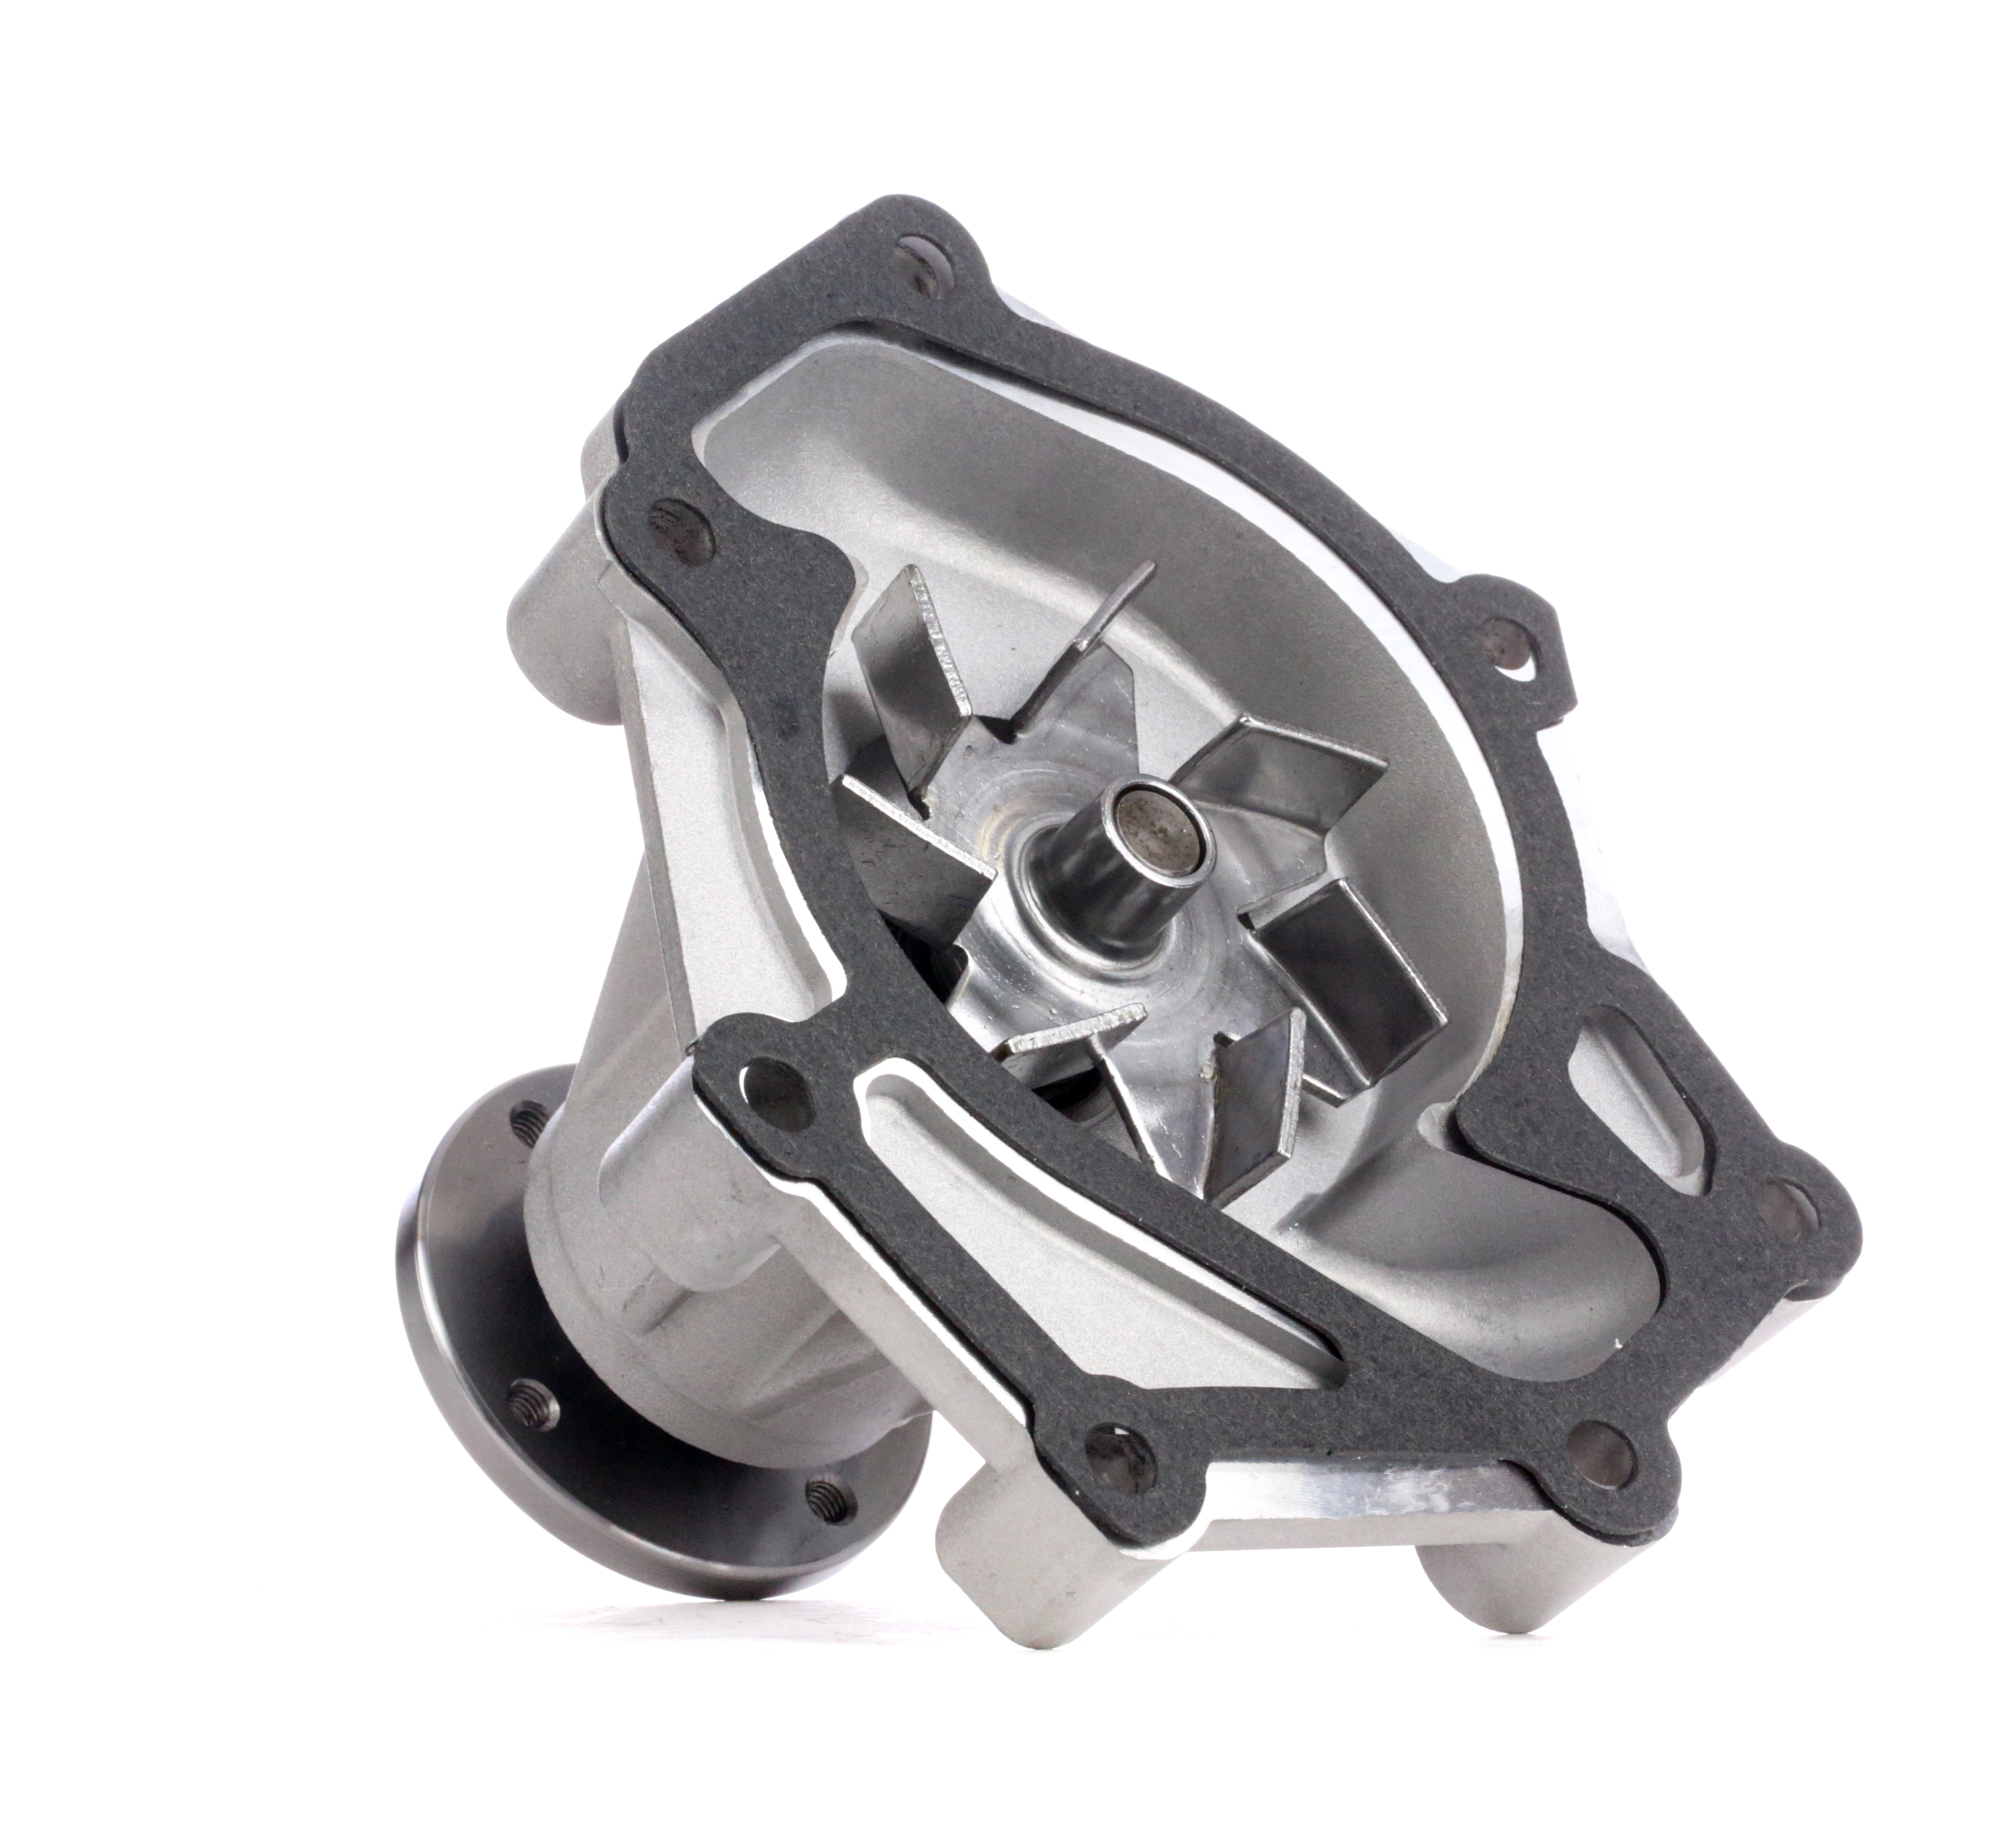 STARK SKWP-0520287 Water pump Cast Aluminium, without belt pulley, with seal, with flange, Mechanical, Metal